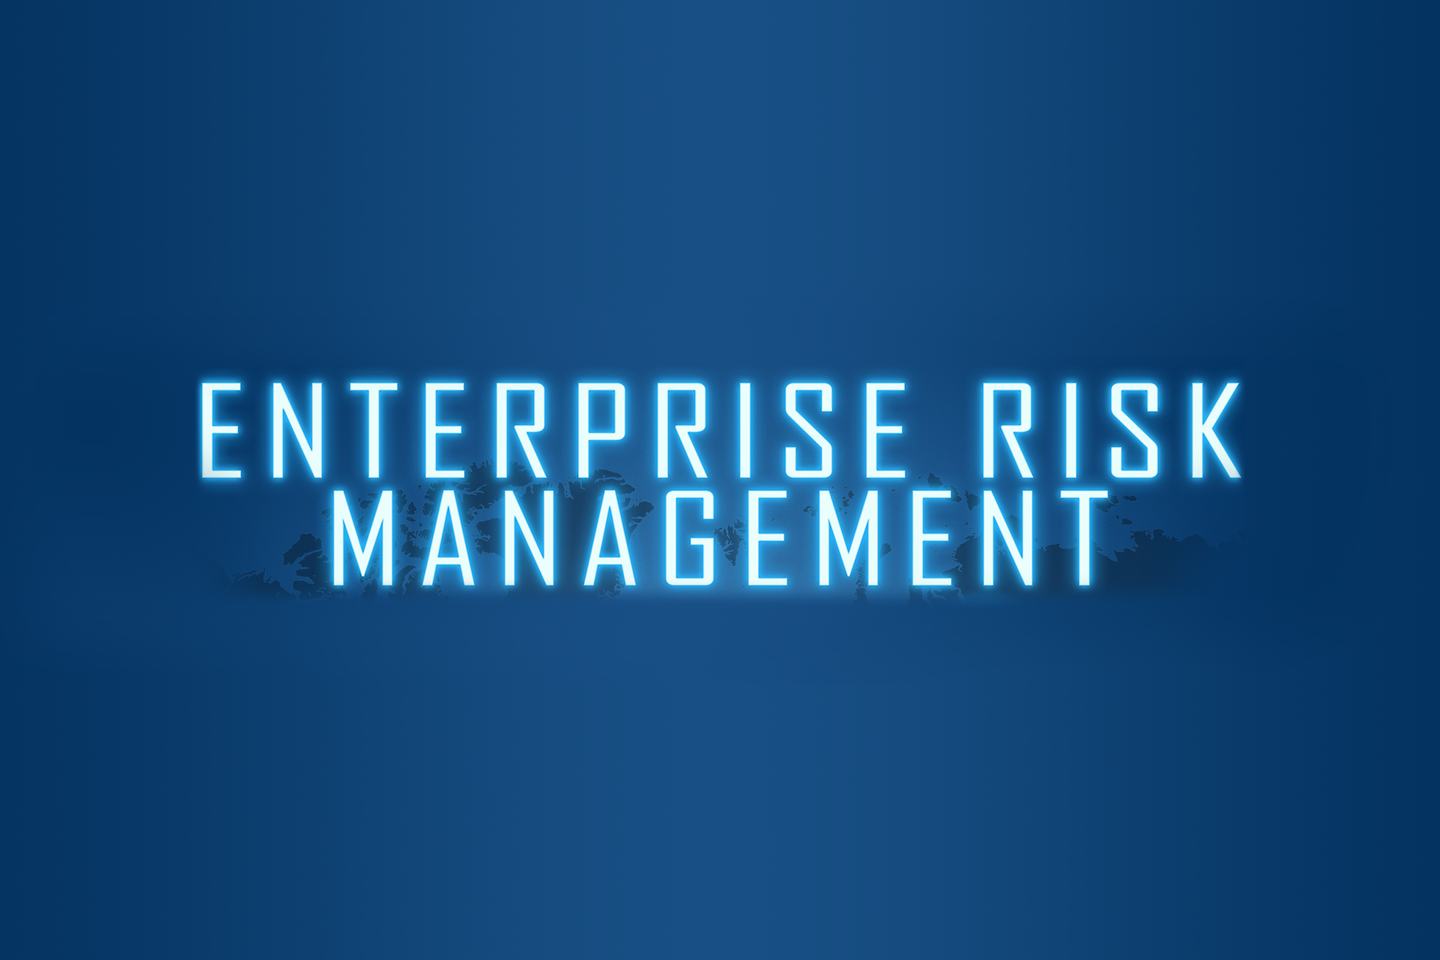 Enterprise Risk Management lettering against a blue background with a map of the world.